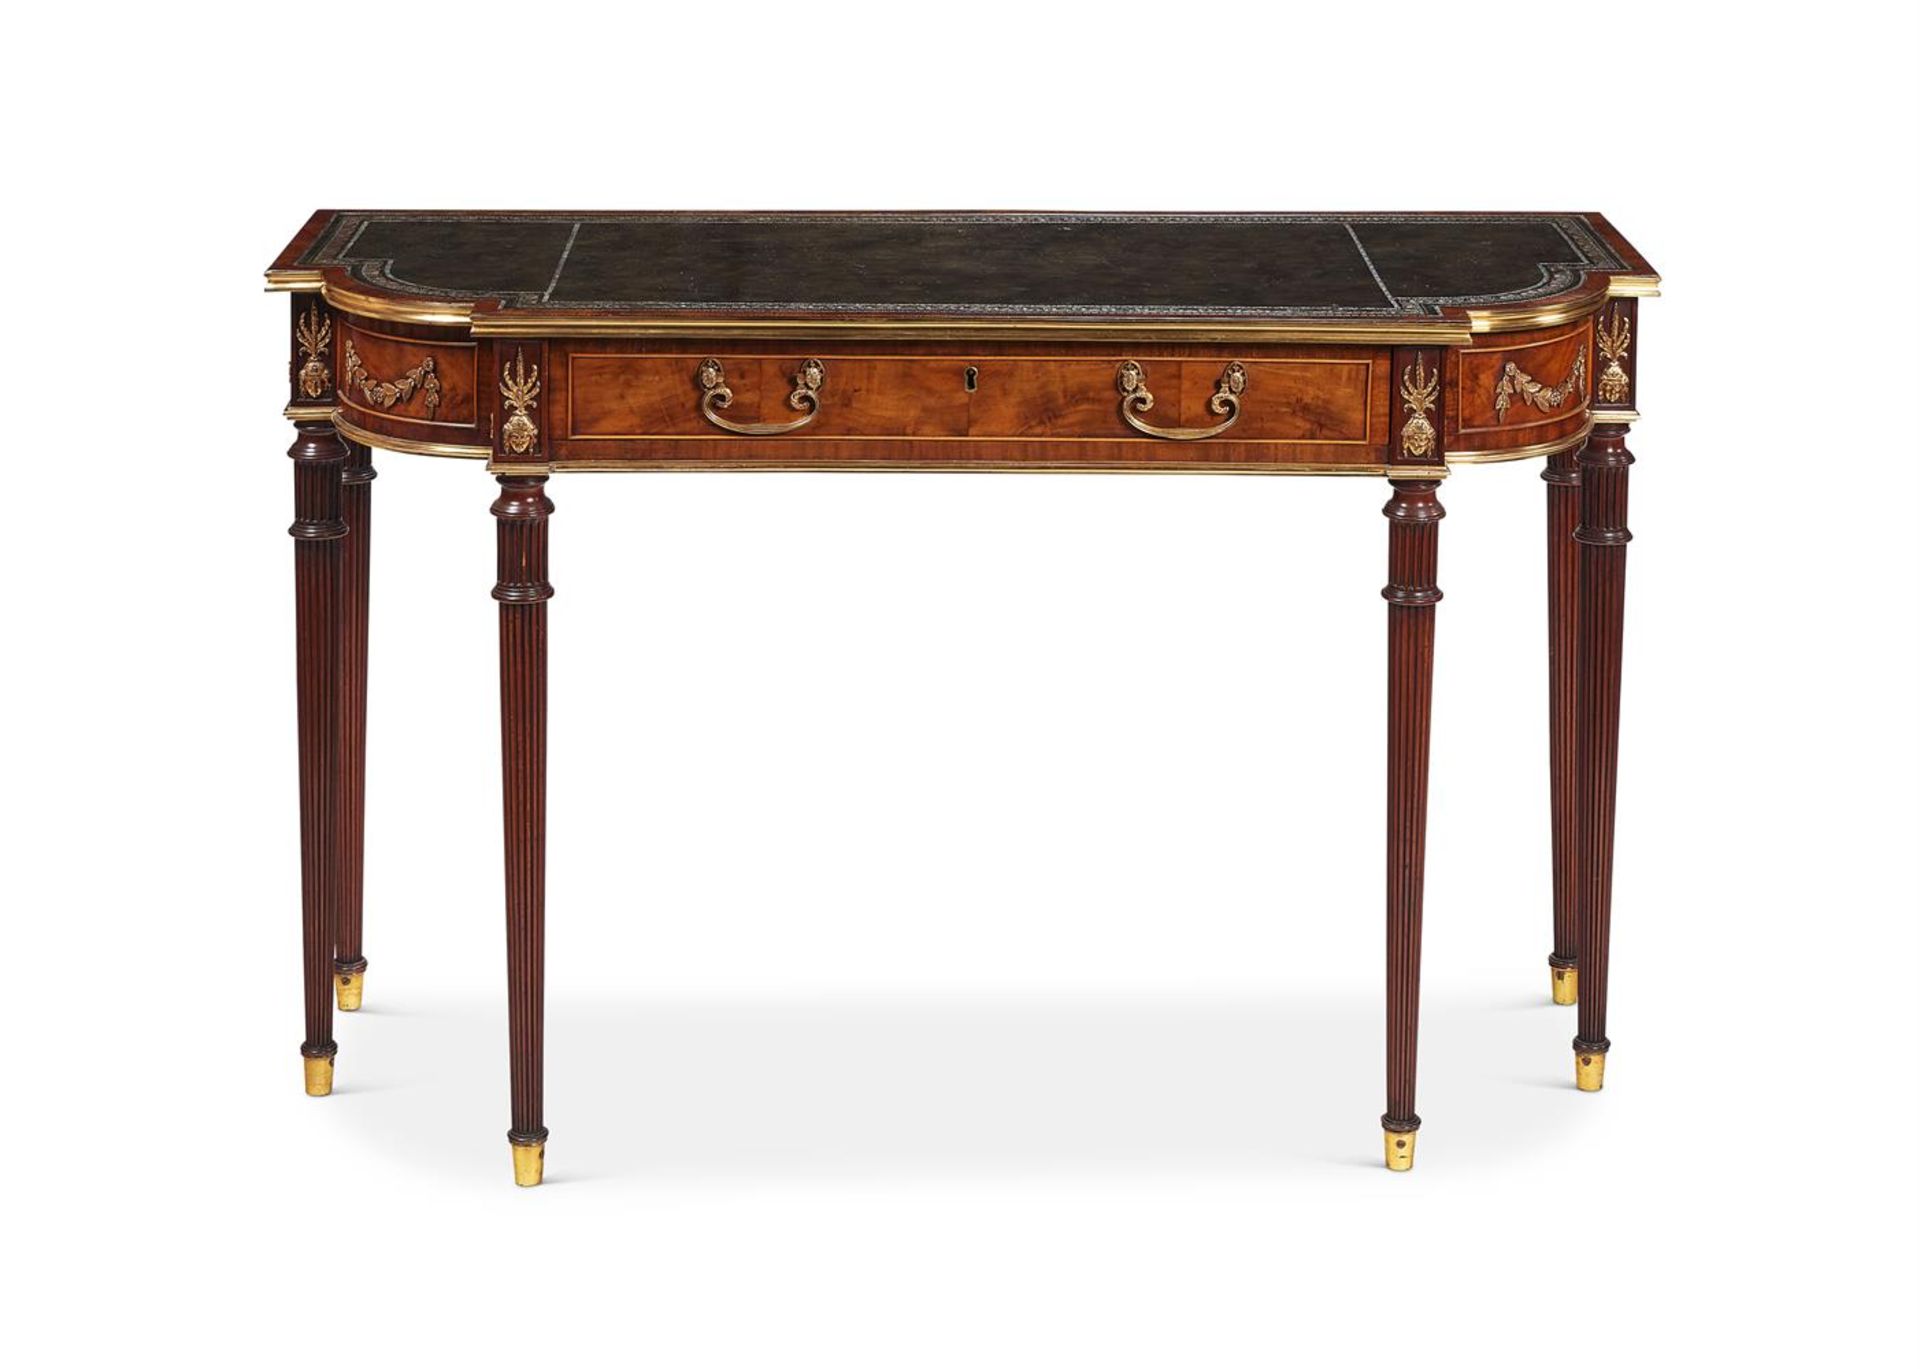 A GEORGE III MAHOGANY AND ORMOLU MOUNTED SIDE TABLE ATTRIBUTED TO GILLOWS